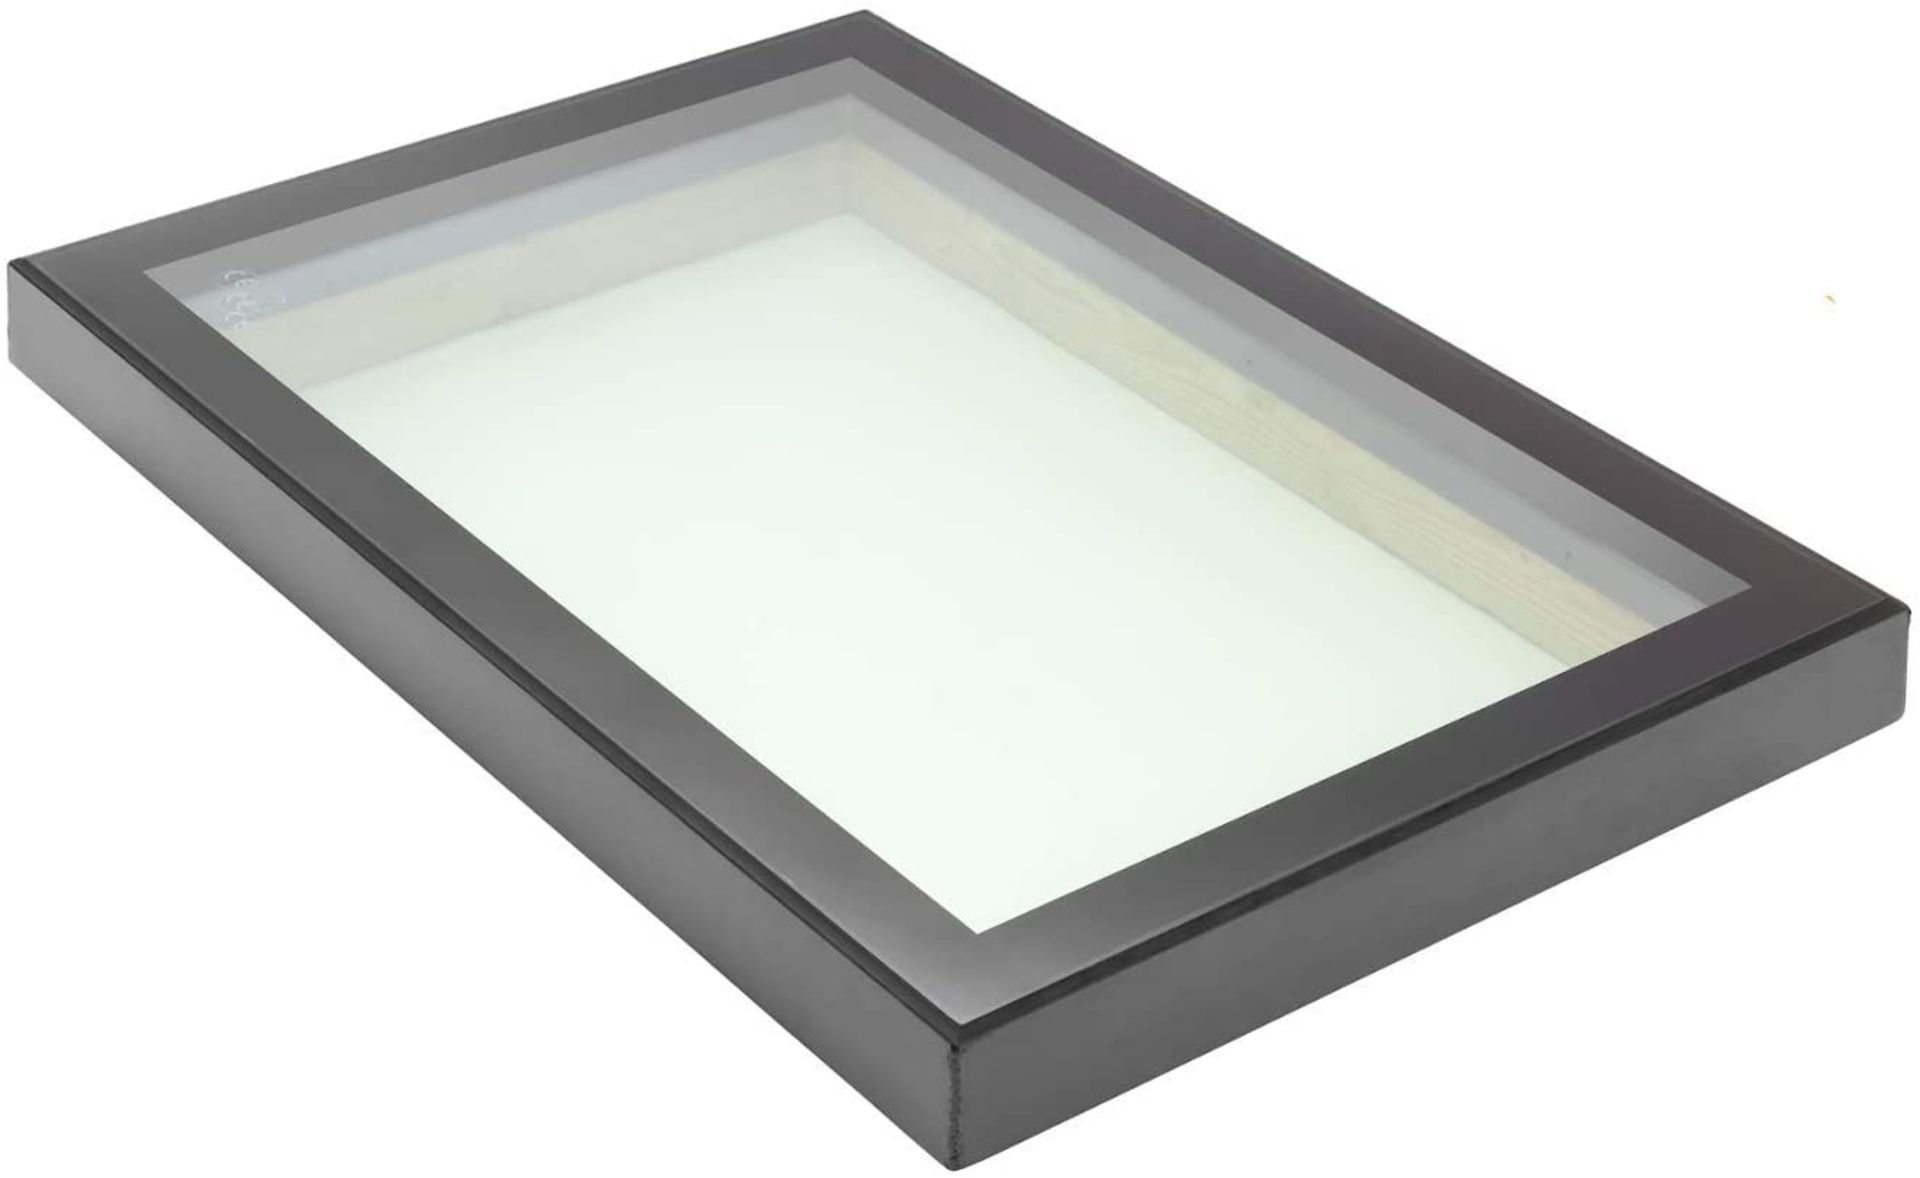 Panoroof (EOS) Fixed Aluminium Triple-Glazed Laminated Skylight with Self-Cleaning Glass -